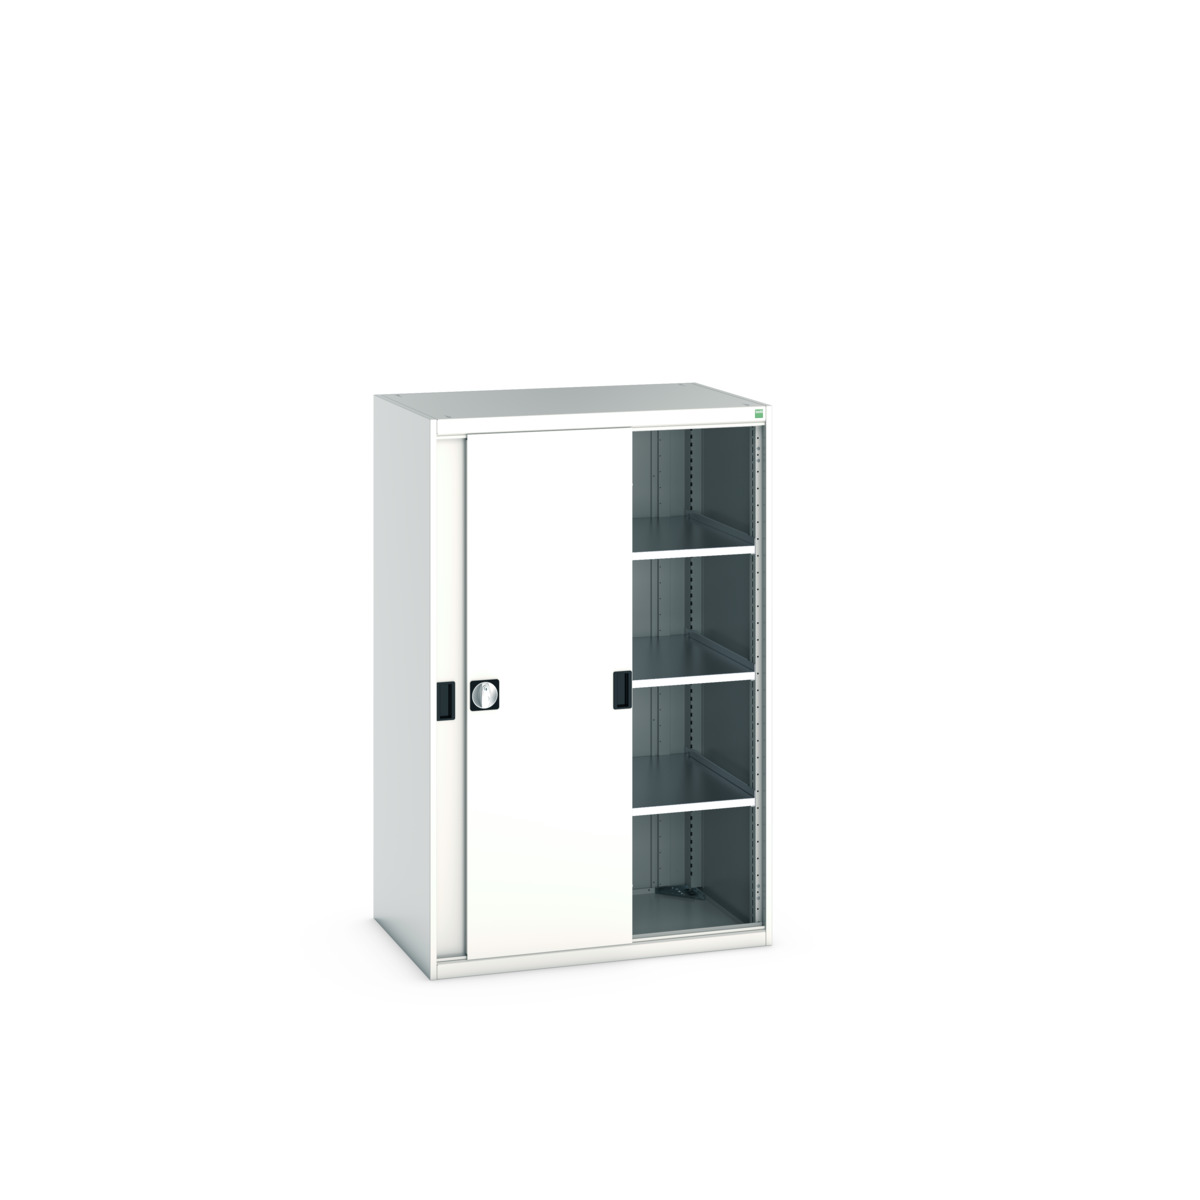 40021214.16V - Armoire Cubio SMS-10616-1